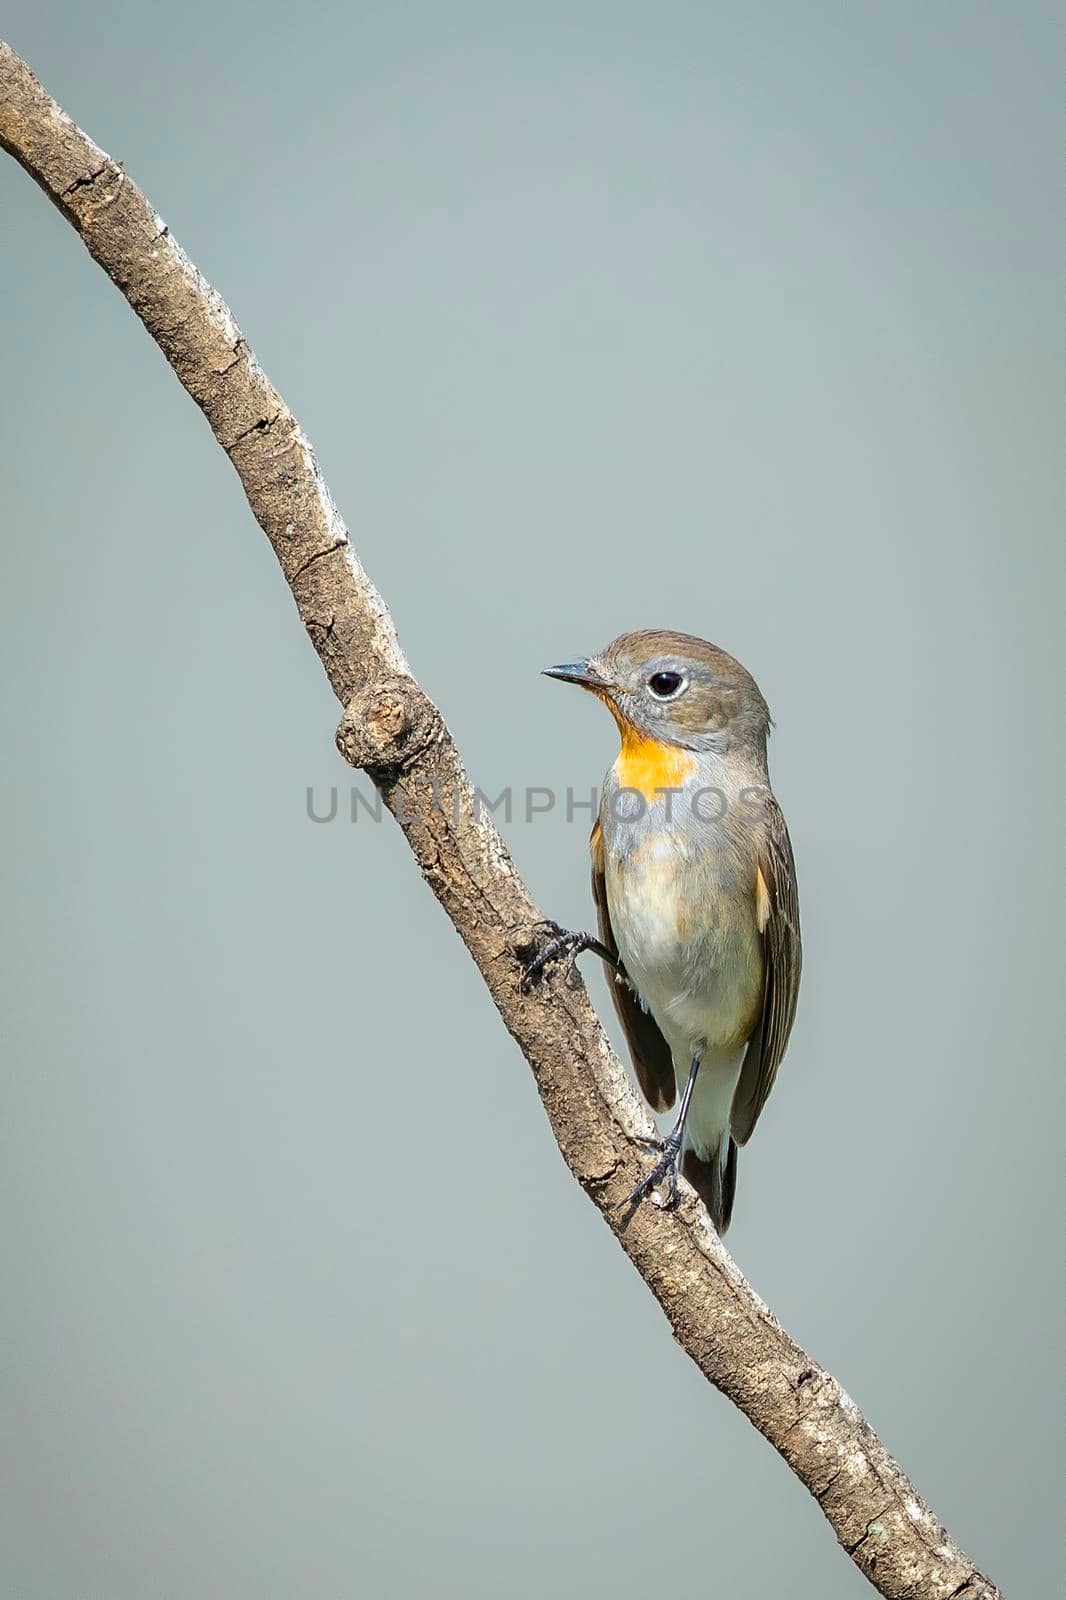 Image of Taiga Flycatcher or Red-throated Flycatcher Bird (Ficedula albicilla) on a tree branch on nature background. Birds. Animal. by yod67